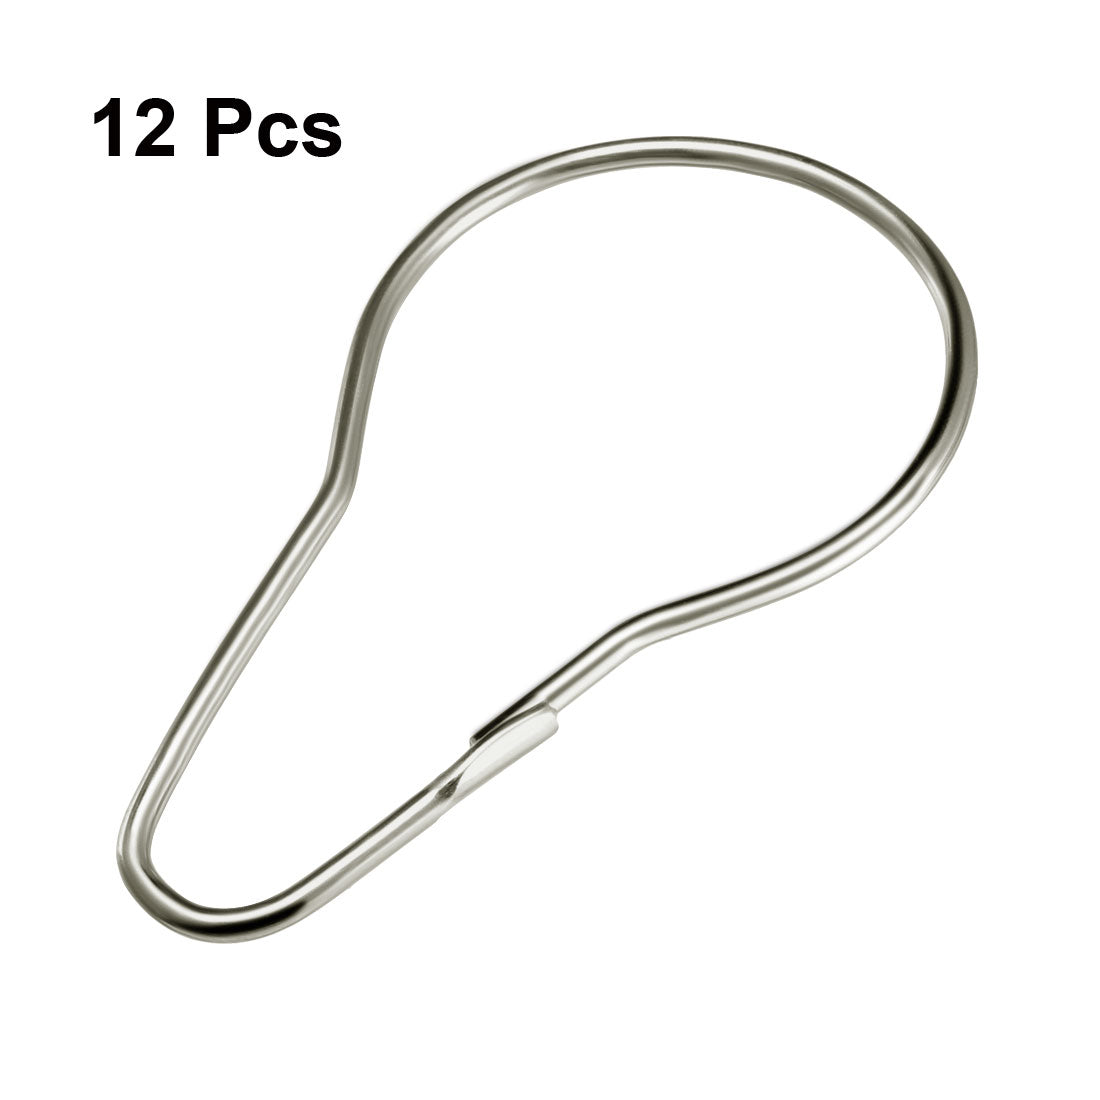 Uxcell Uxcell Shower Curtain Ring Hooks Metal for Bathroom Shower Rods Curtains Liners 12 Pcs